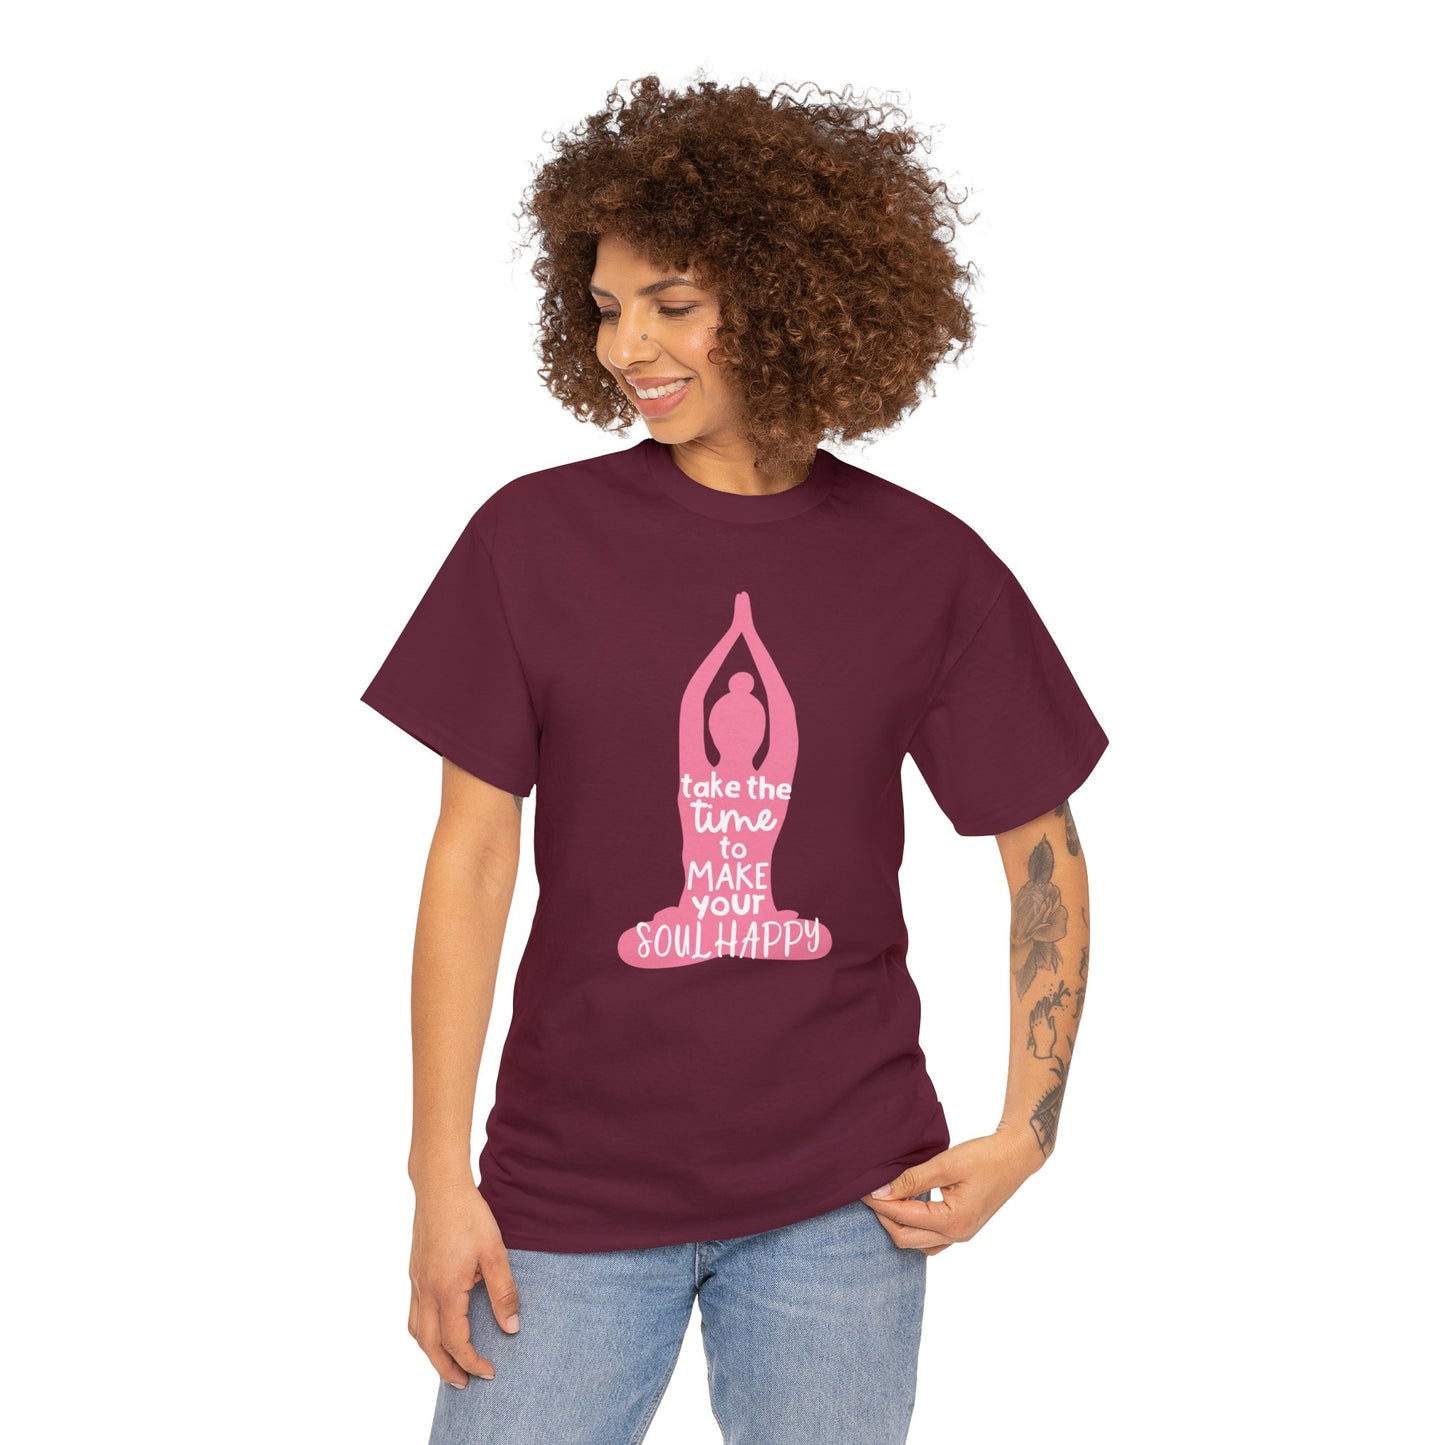 Smile with Our Hilarious Yoga T-Shirt Collection - Unisex Heavy Cotton Tee